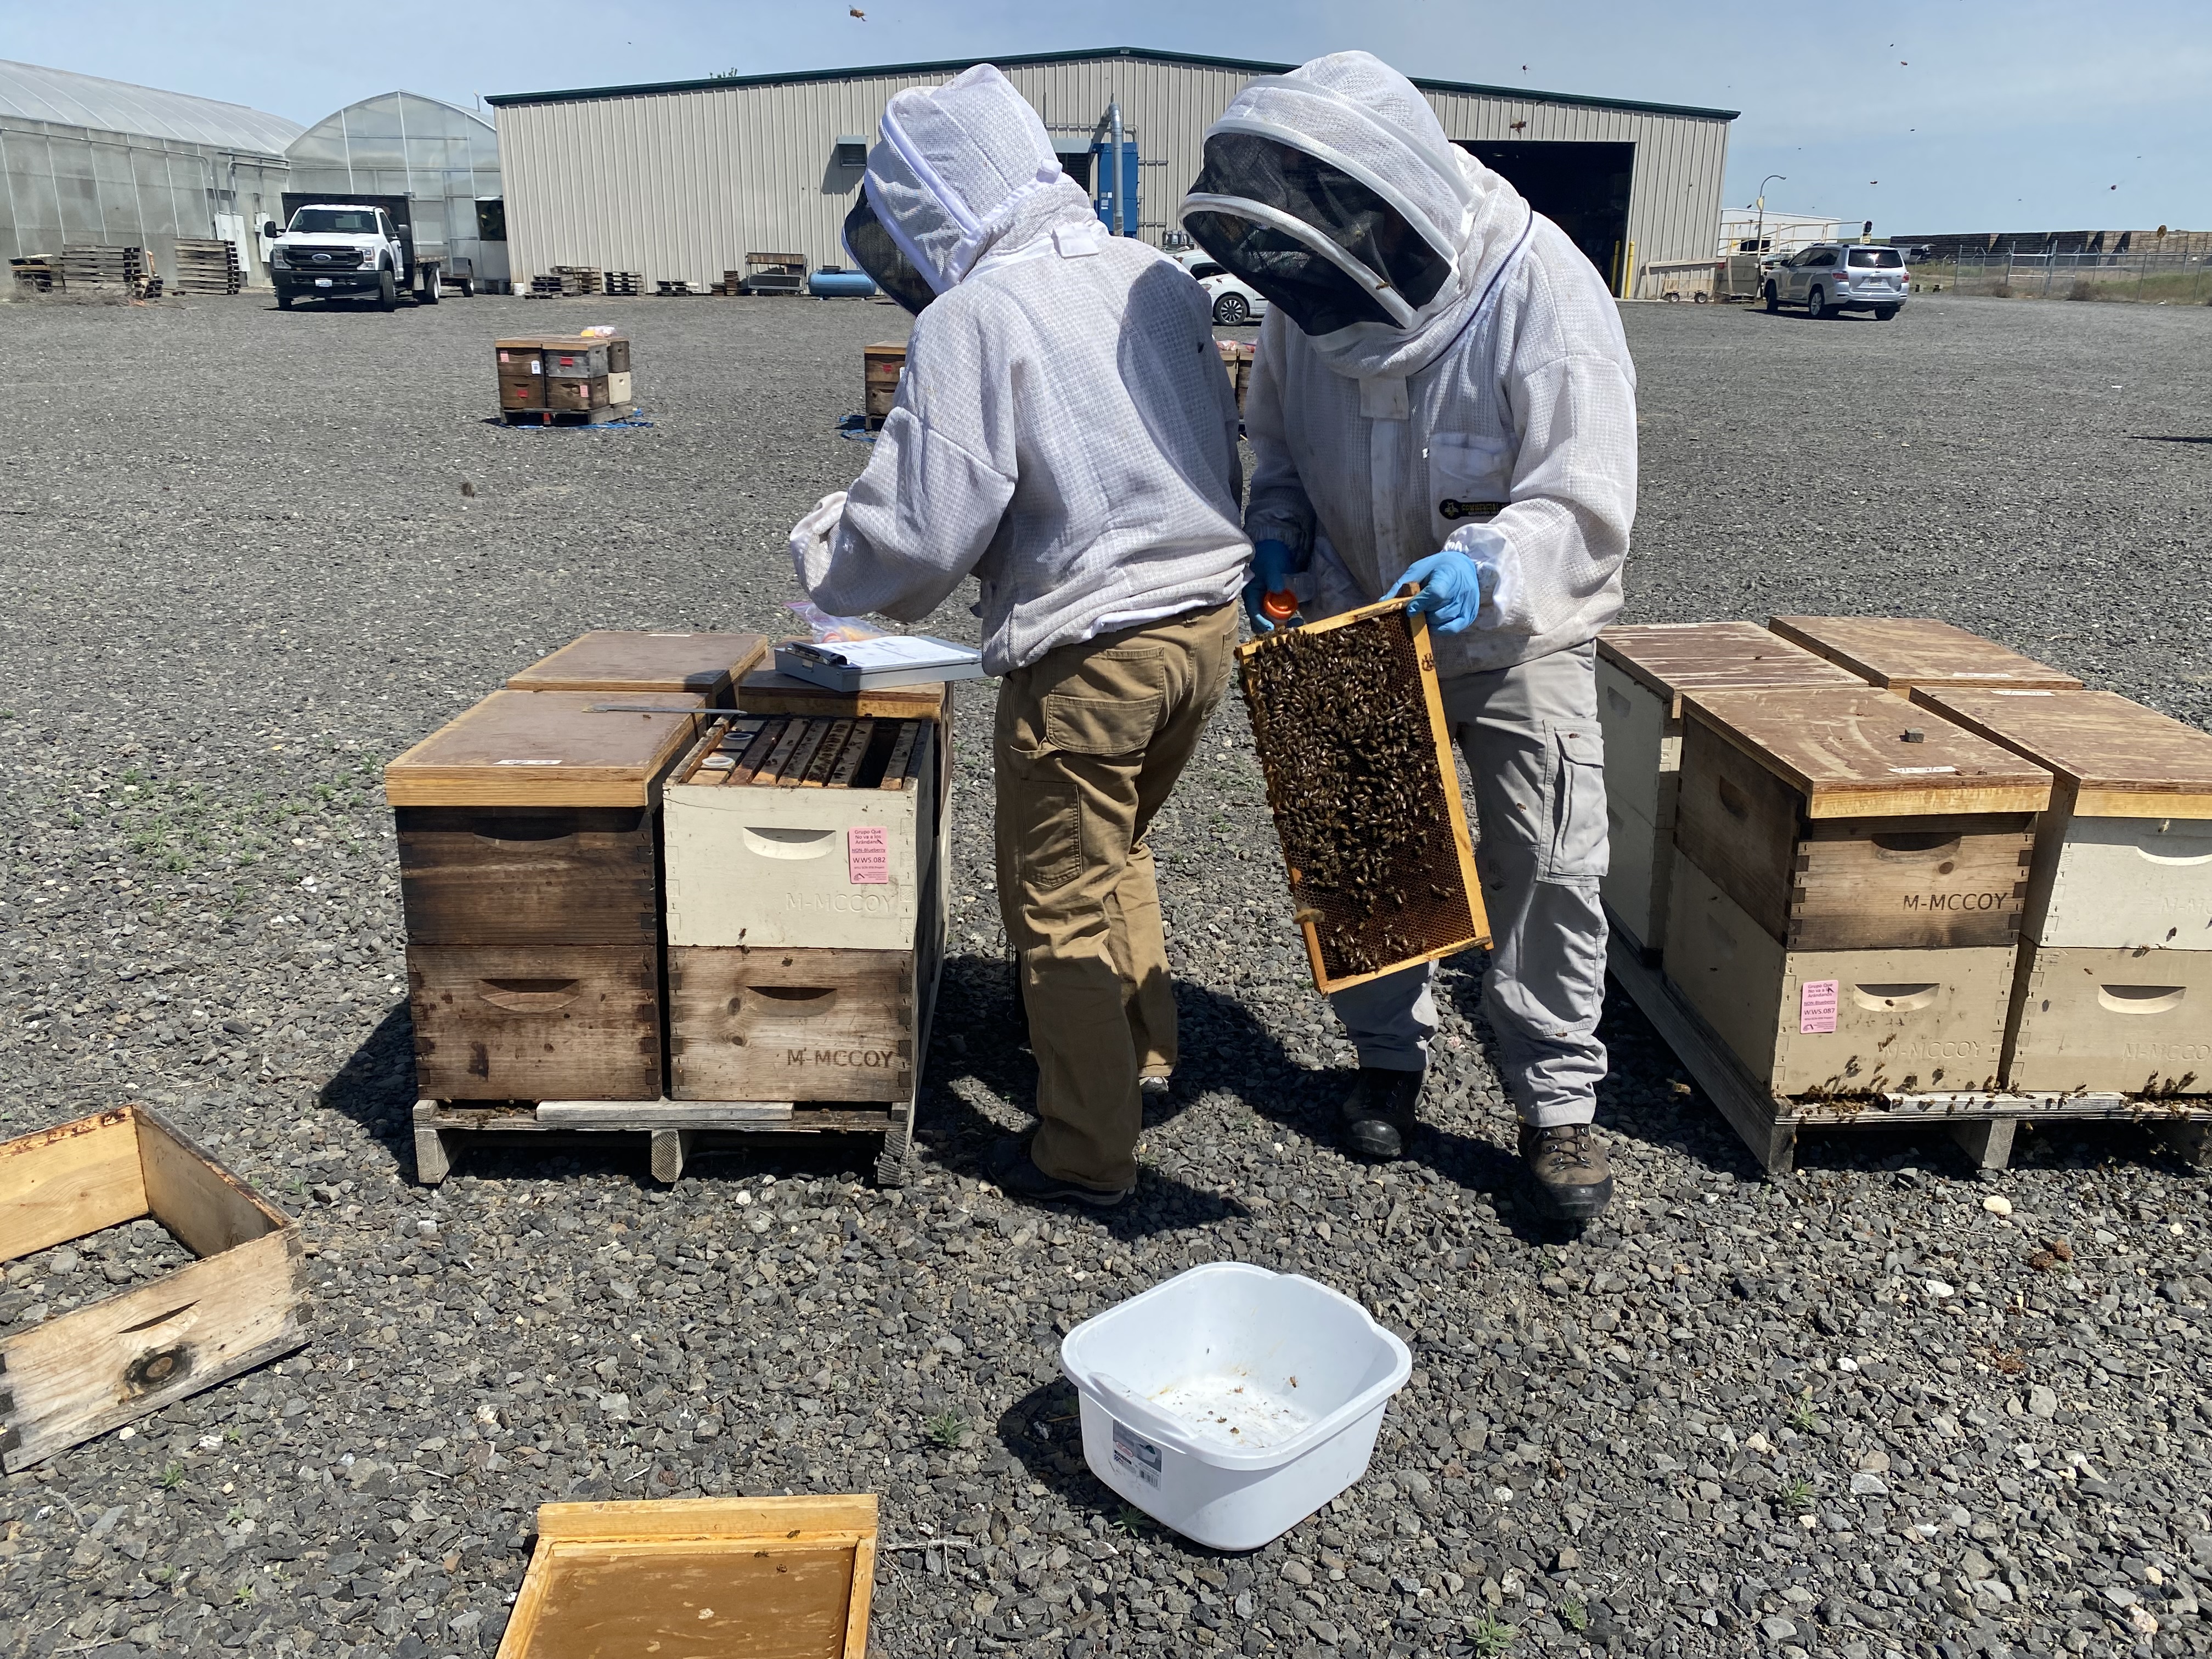 Workers May 15 take samples of bees, larvae and honey from each hive in the bee yard of Washington State University’s bee-research facility in Othello, Washington.